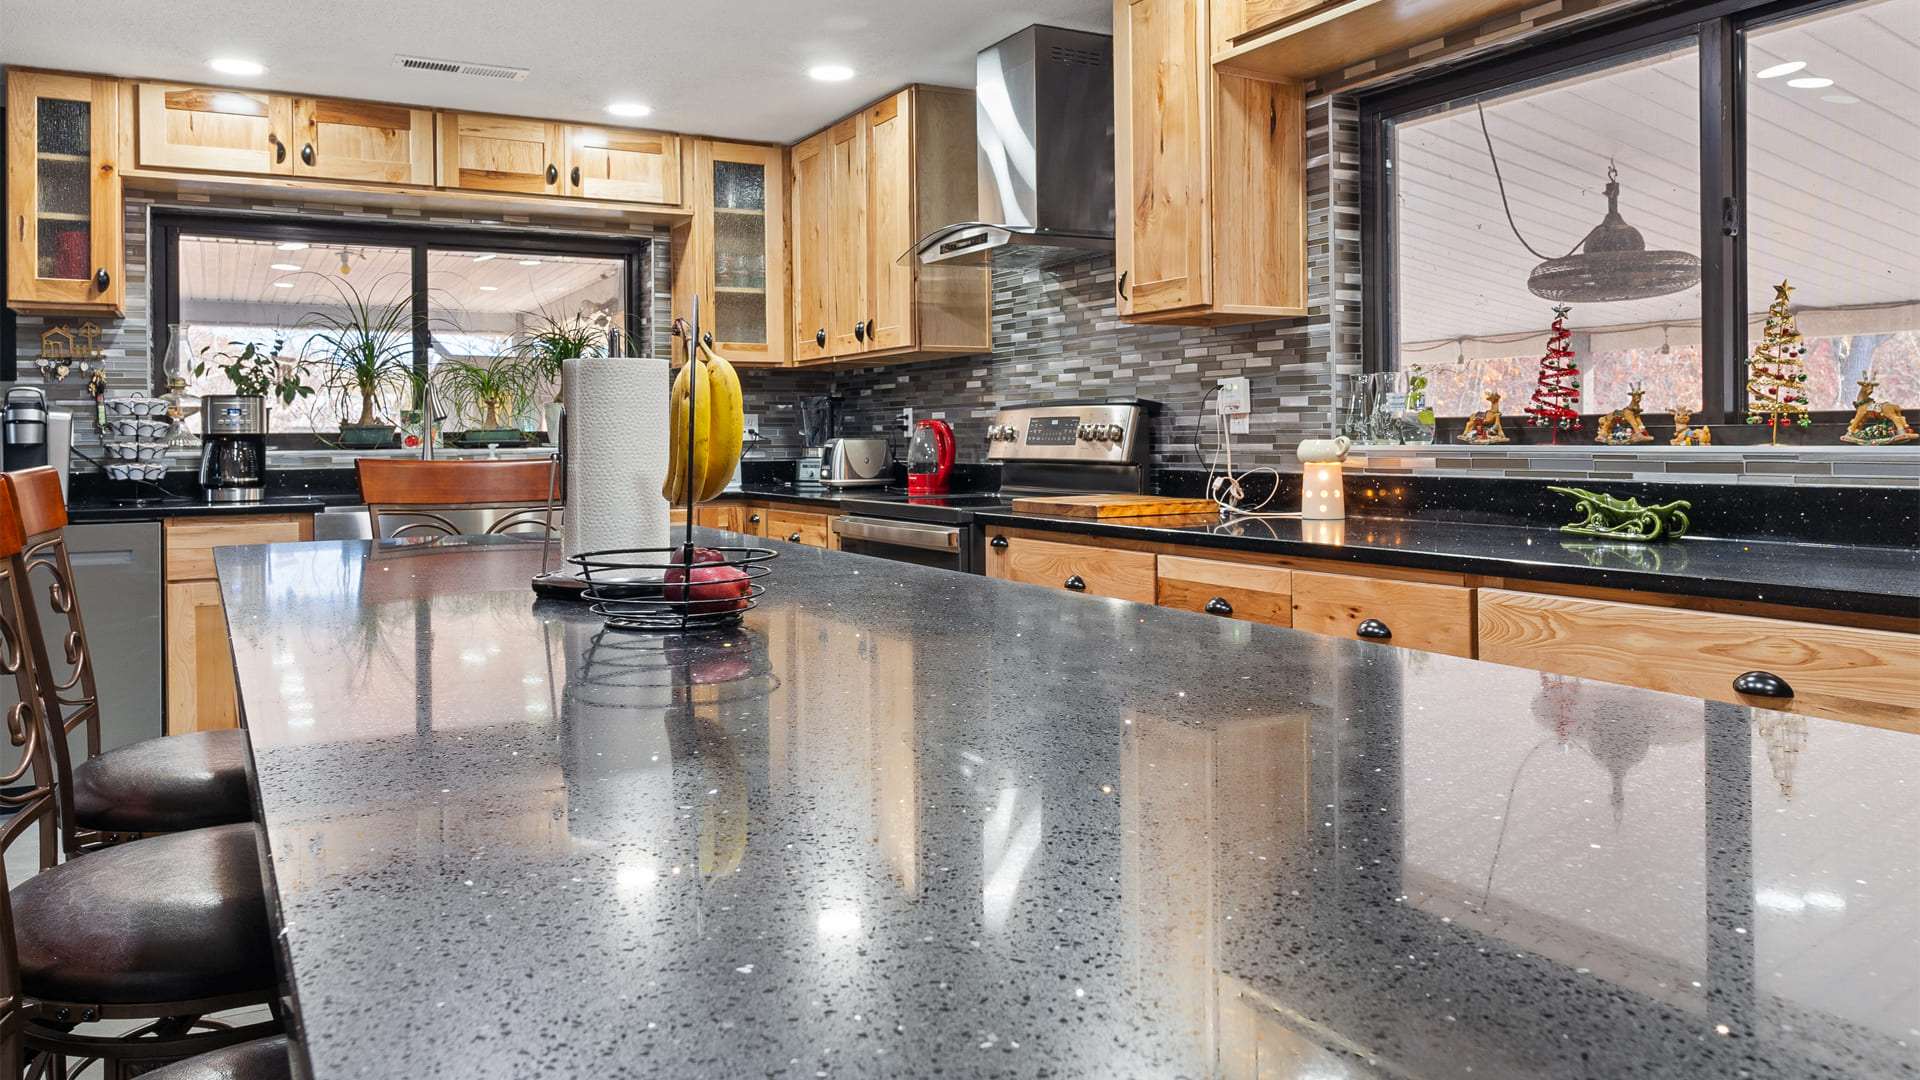 A spacious kitchen with a large countertop island at the center and rows of blonde wood cabinets set off with a stone, staggered tile backsplash